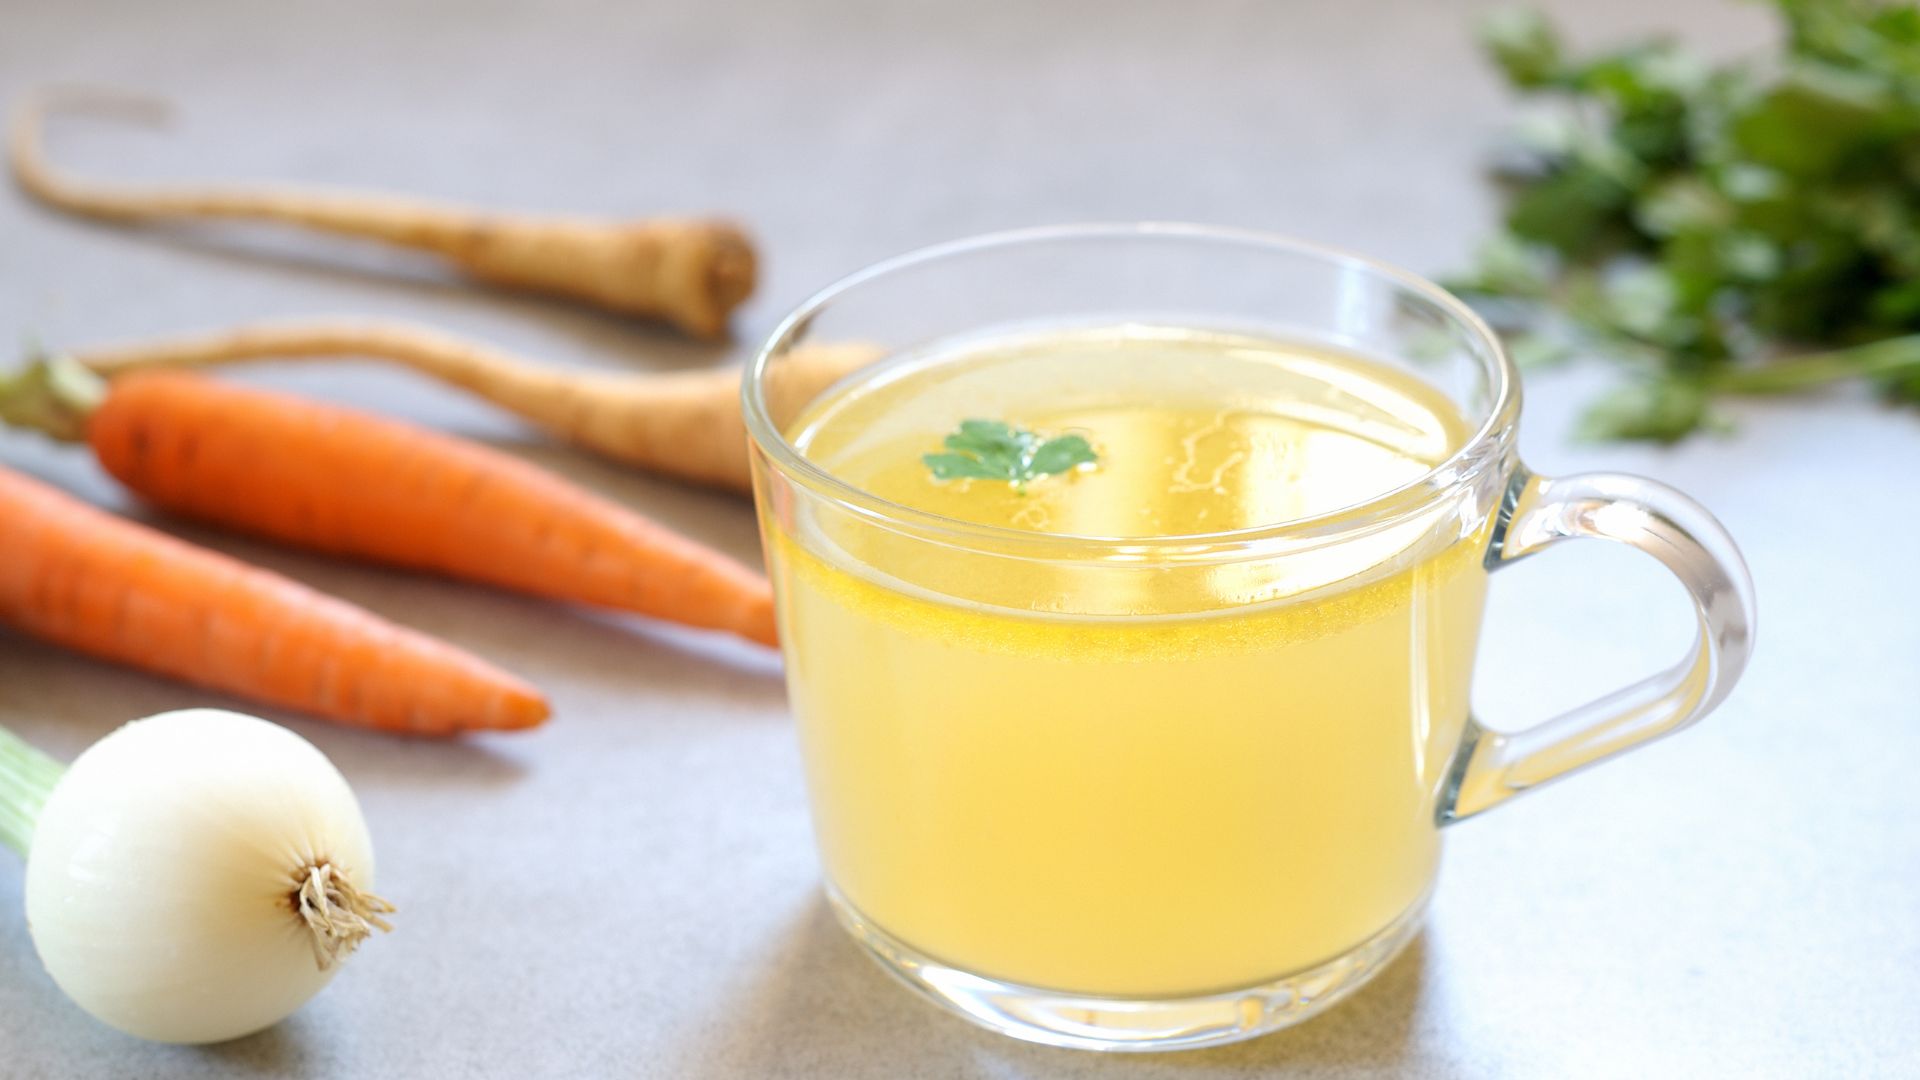 bone broth sits in a glass cup on a table with out of focus carrots and an onion in the background to help boost collagen production